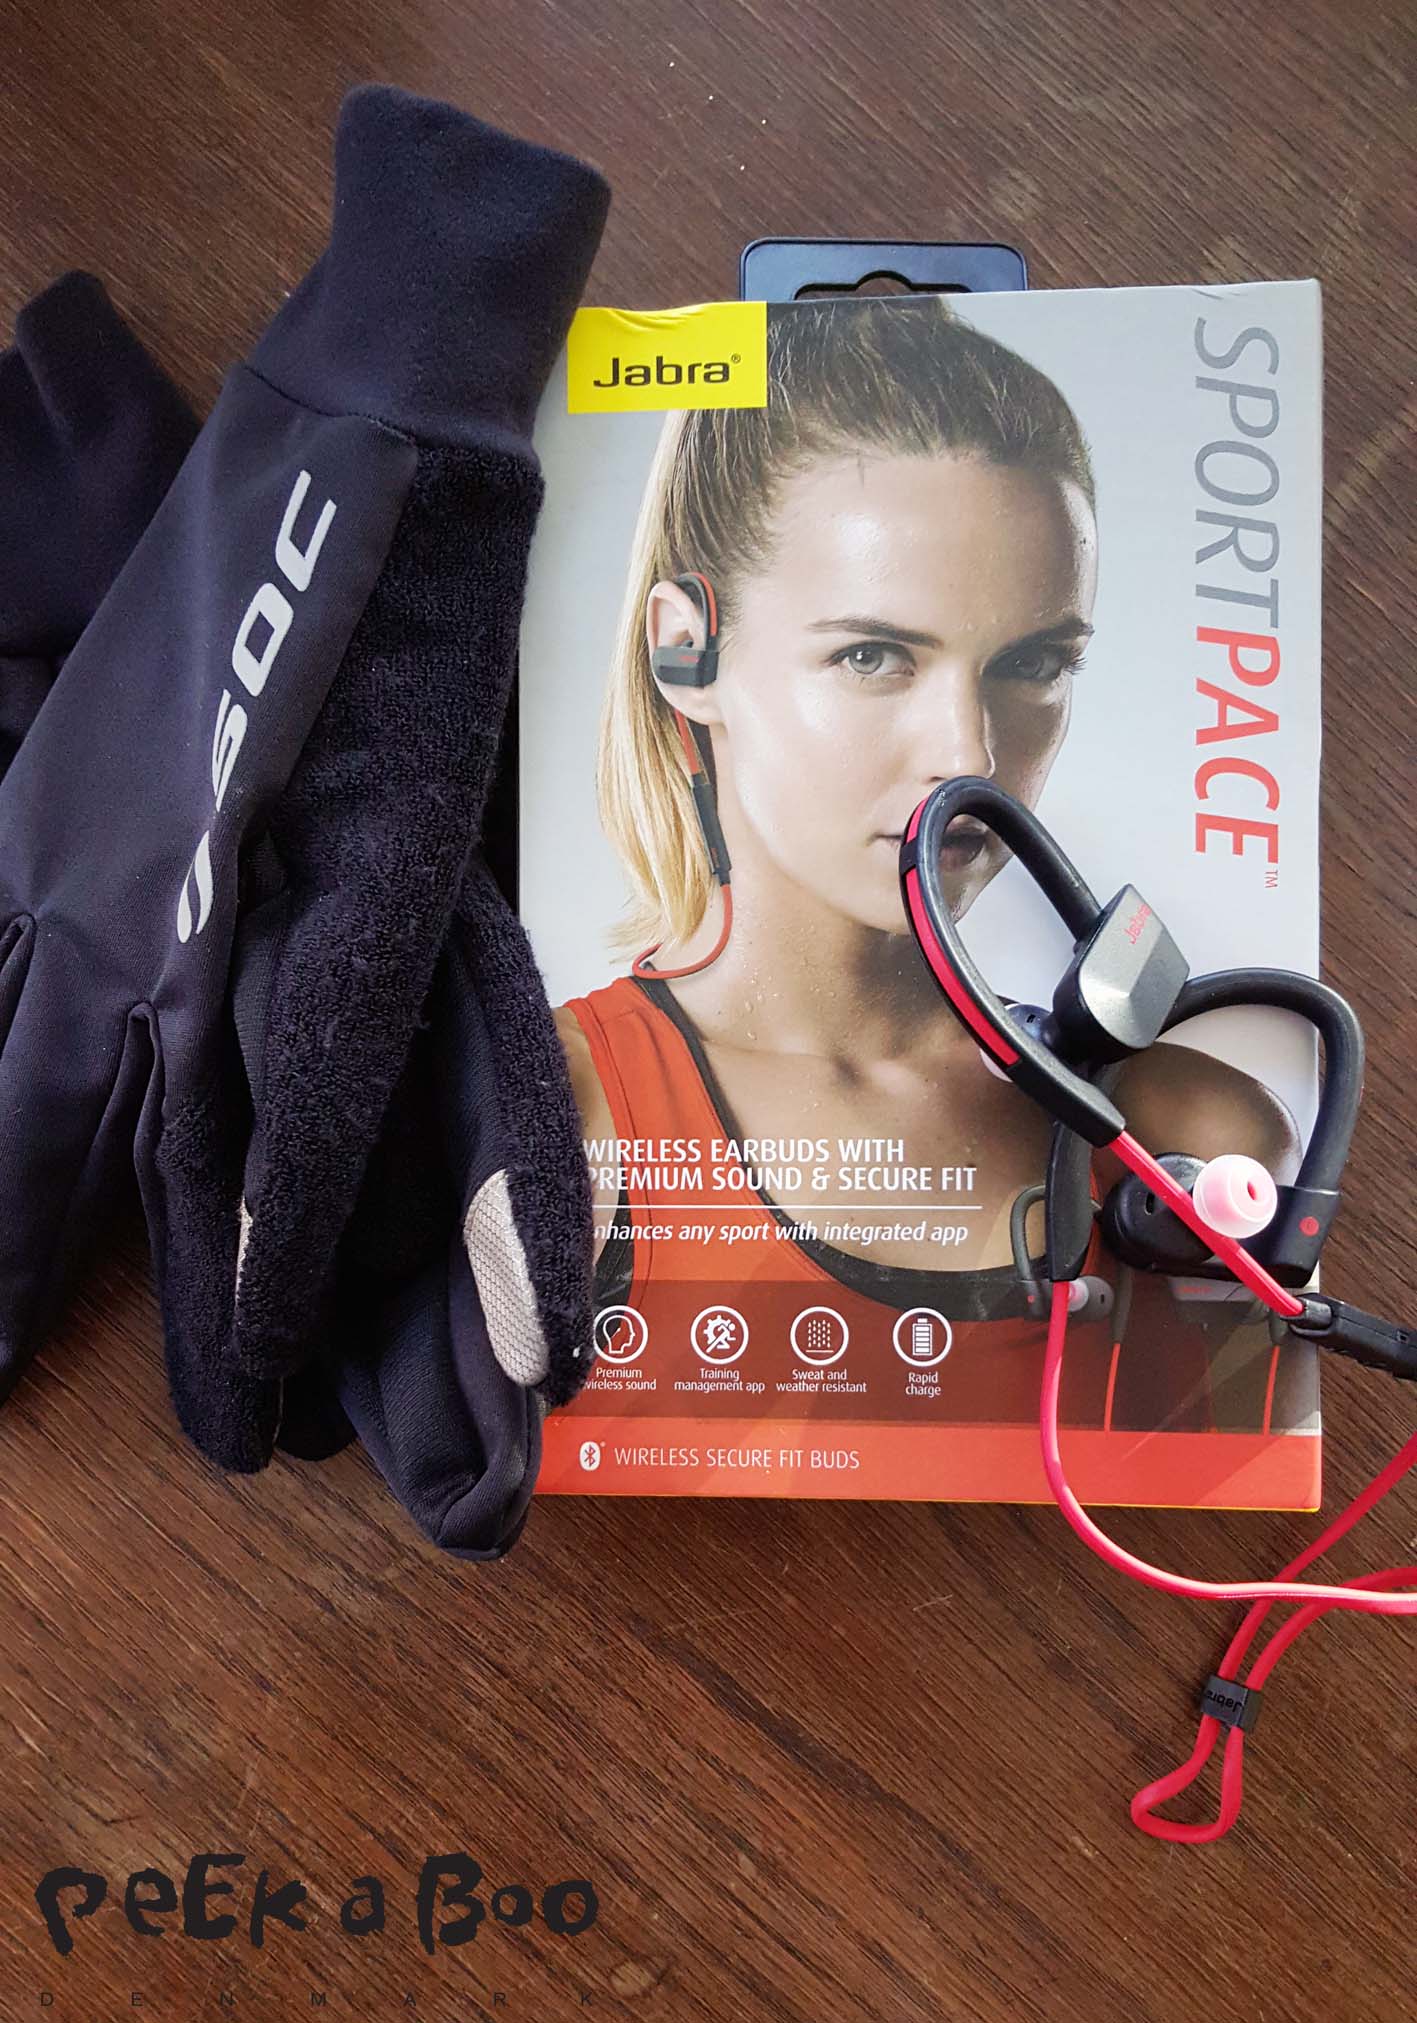 Jabra sport pace Wireless earbuds and soc gloves that can control my Samsung S6 Edge without taking them off.